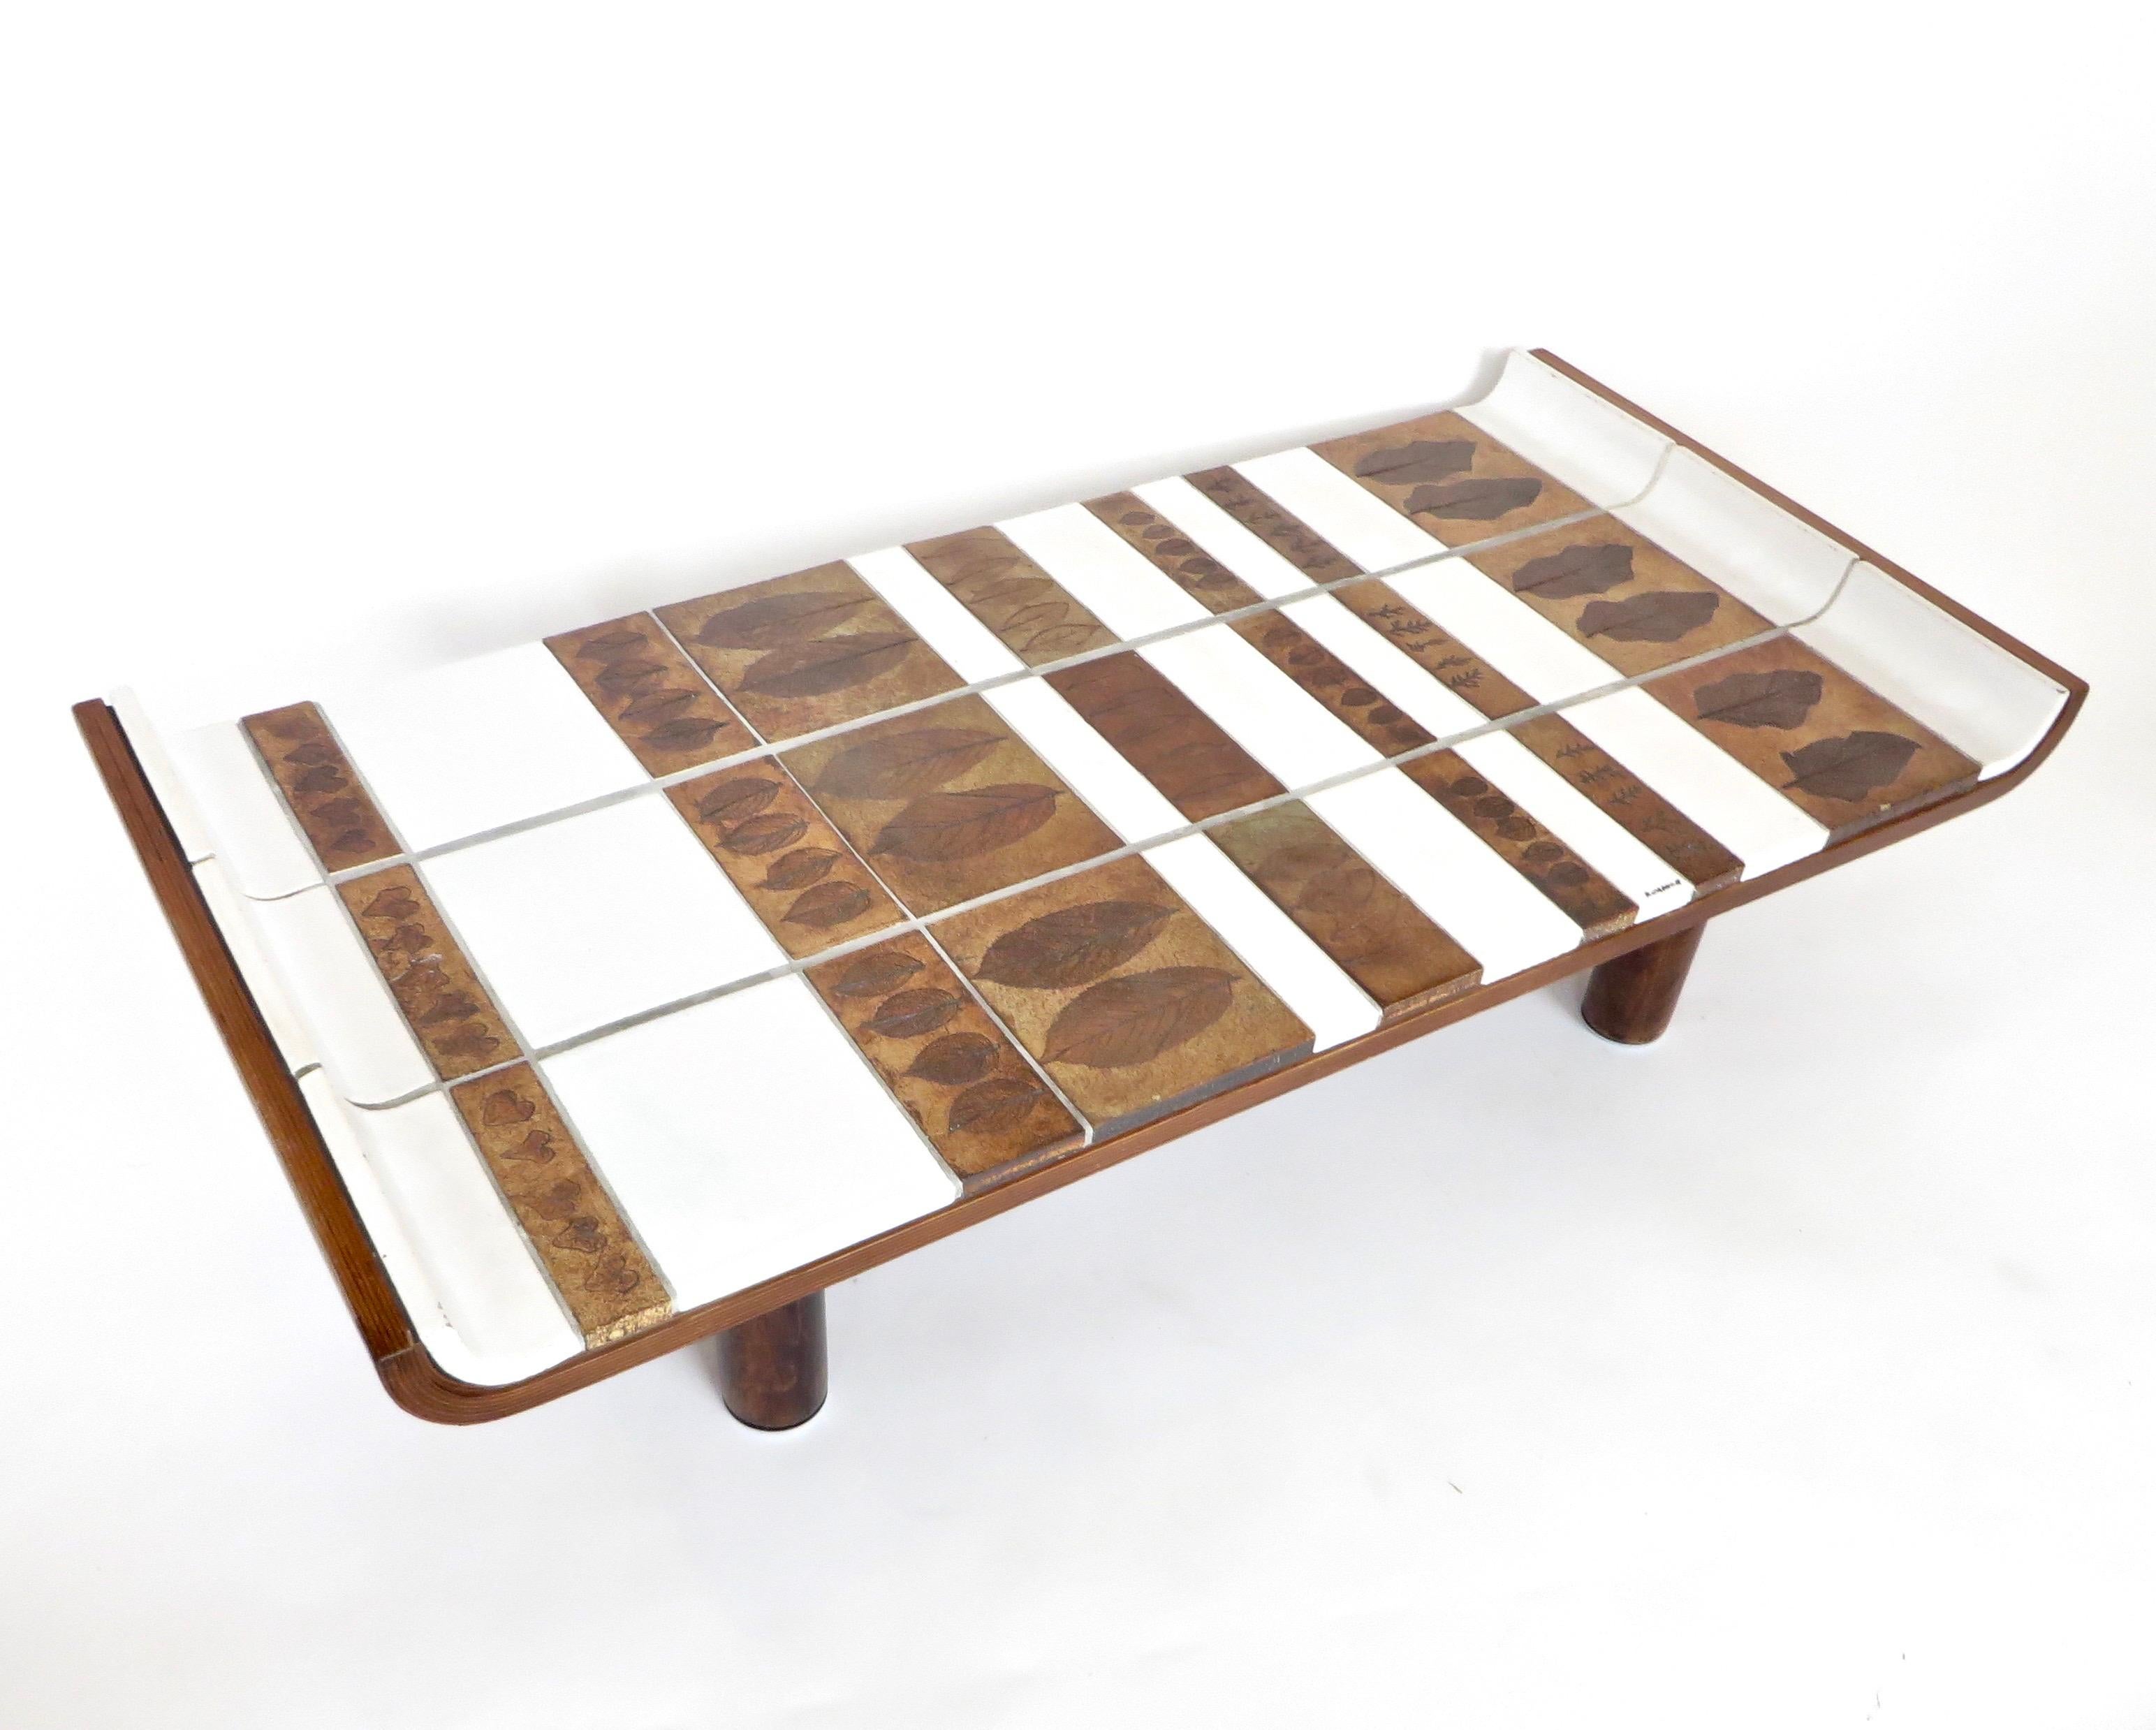 Roger Capron Pagode or Fuji model ceramic coffee table, circa 1960. Vallauris, France.
Oak frame supporting white glazed tiles and tones of brown ceramic tiles with impressed leaves in the ceramic in the iconic impressed leaf series of Roger Capron